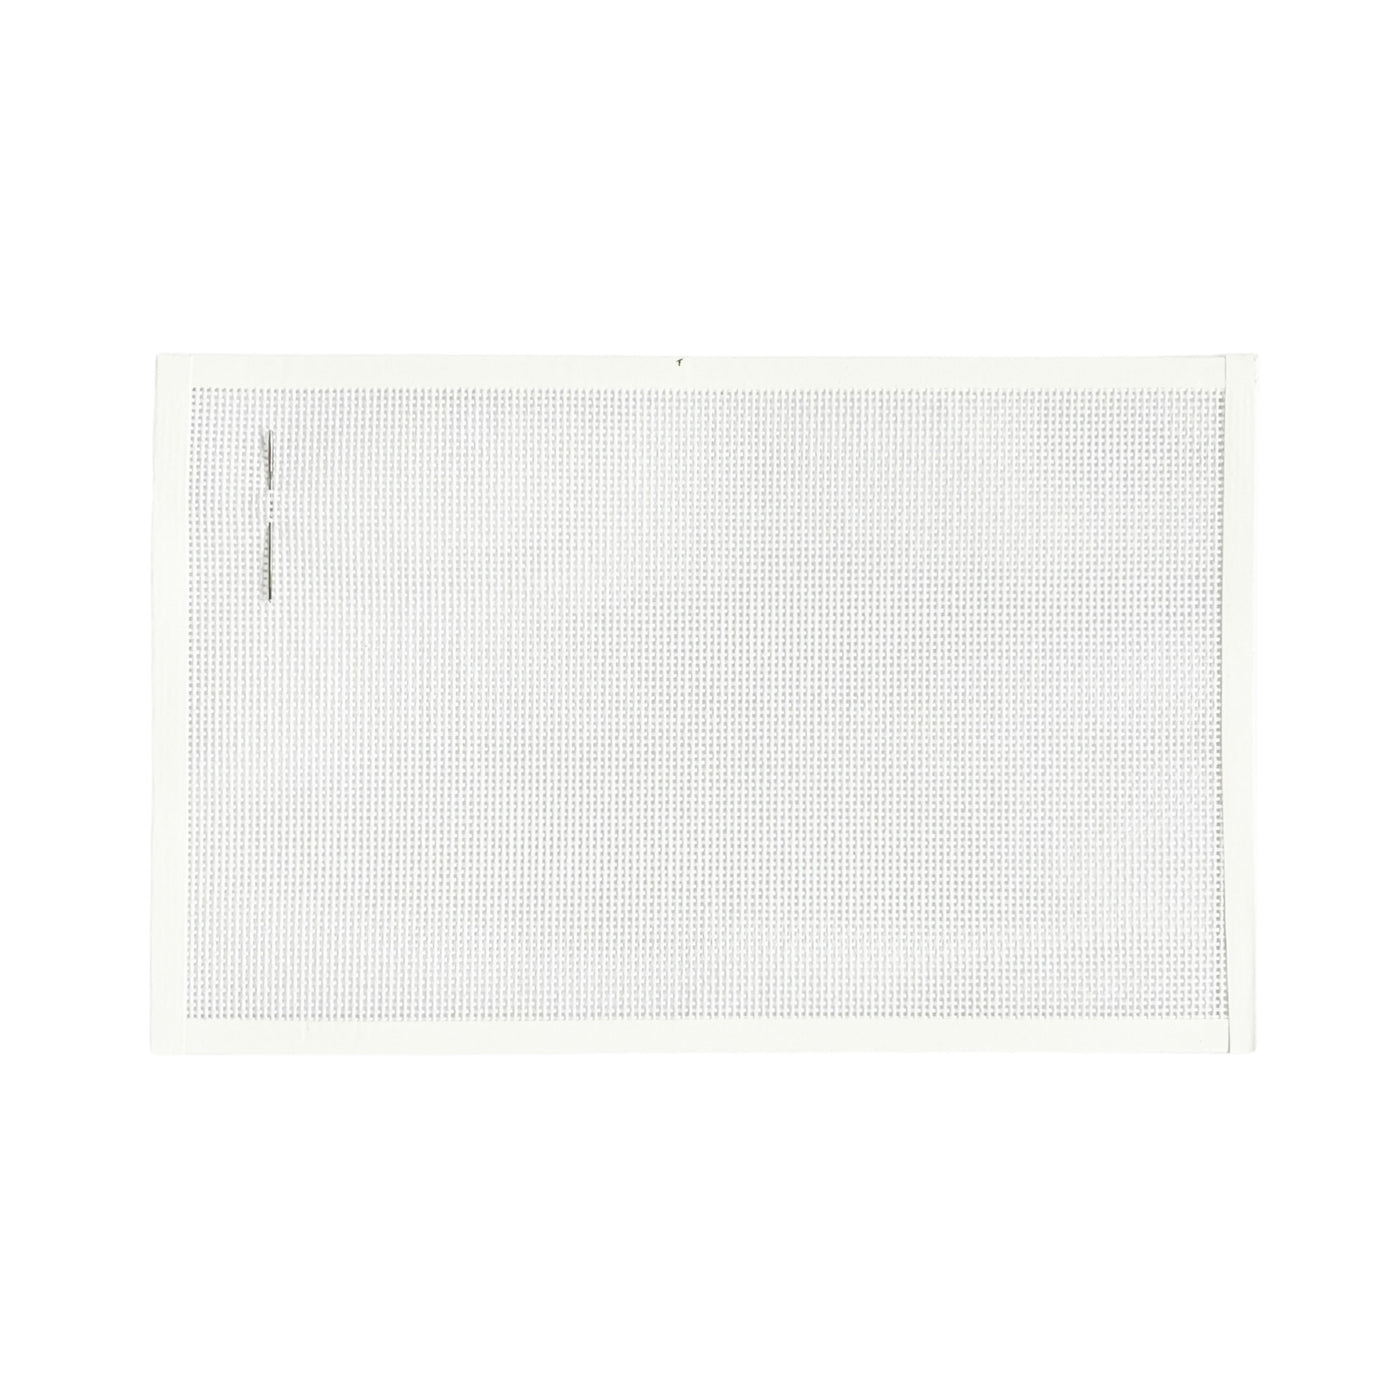 Blank piece of white 13 mesh mono needlepoint canvas with white binding tape and a tapestry needle on the left side of the canvas